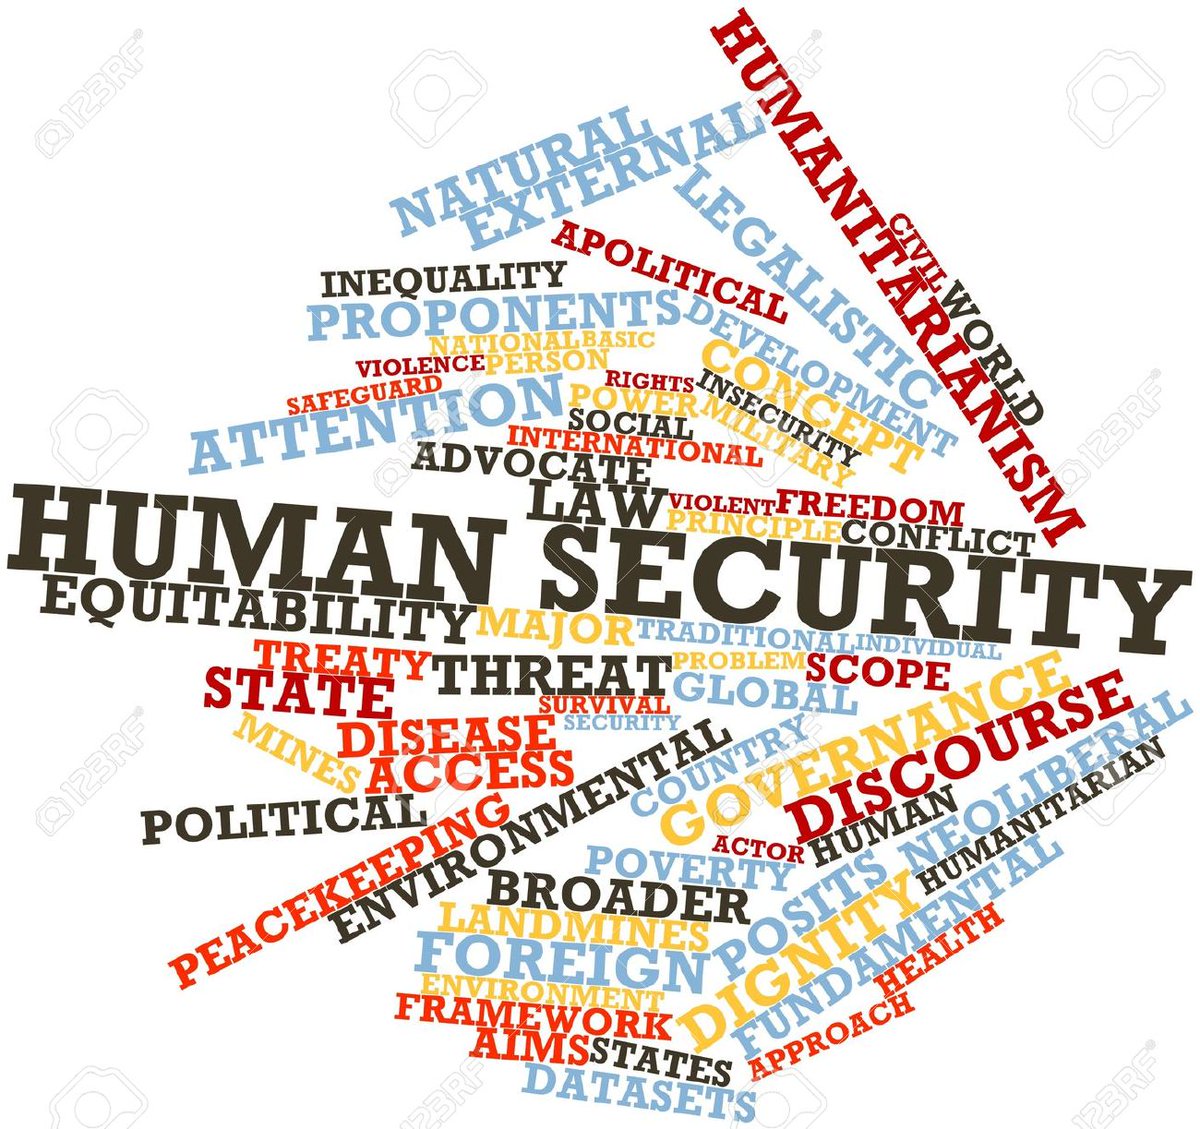 Module 2 of @DefAcUK Defence #HumanSecurity cse done. Thanks to all our speakers including @jmuraszkiewicz  @AikoIiris.  Key topics covered this week including #HumanTracking #WPS #CAAC & #CulturalPropertyProtection.